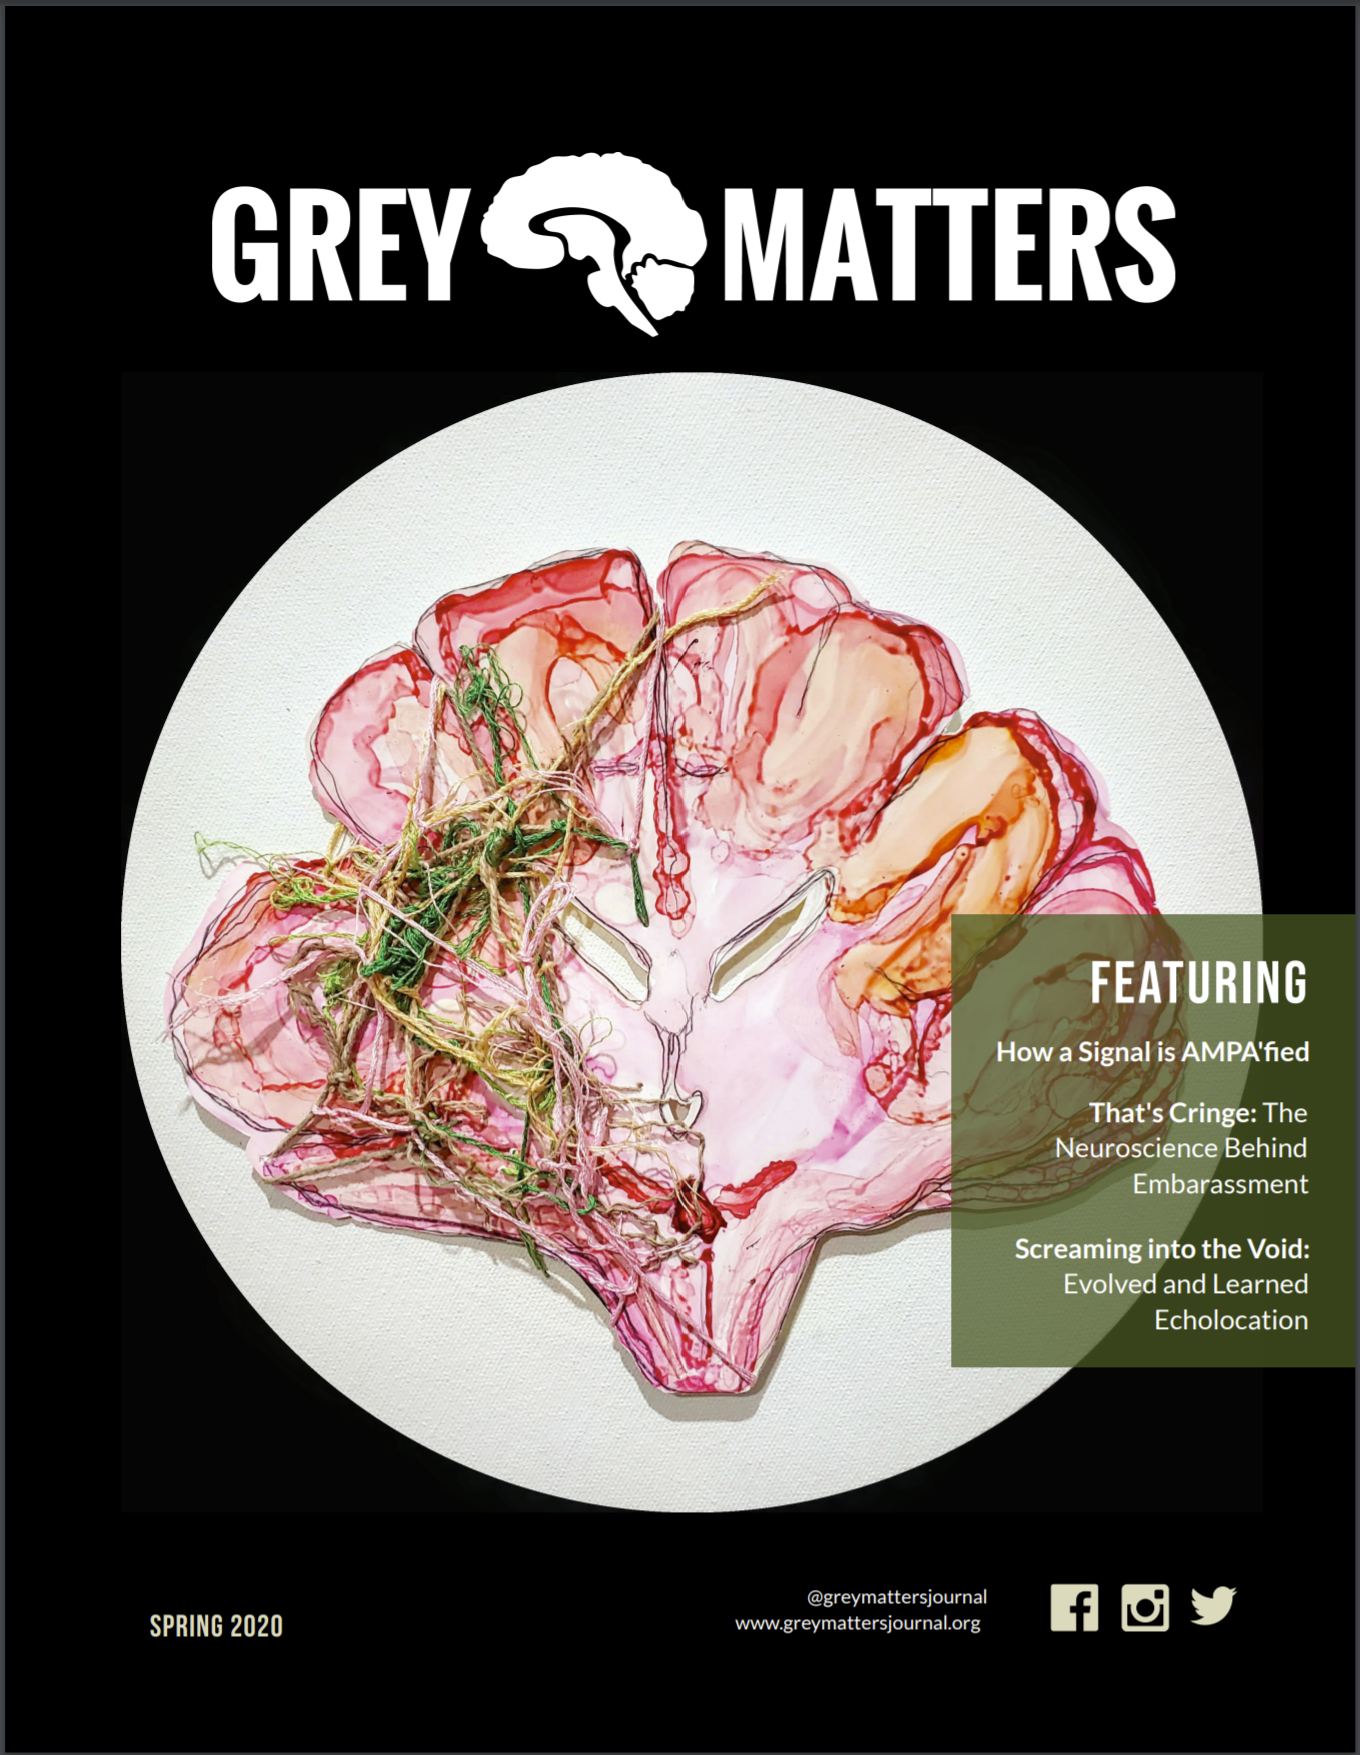 Grey Matters Journal Issue 20